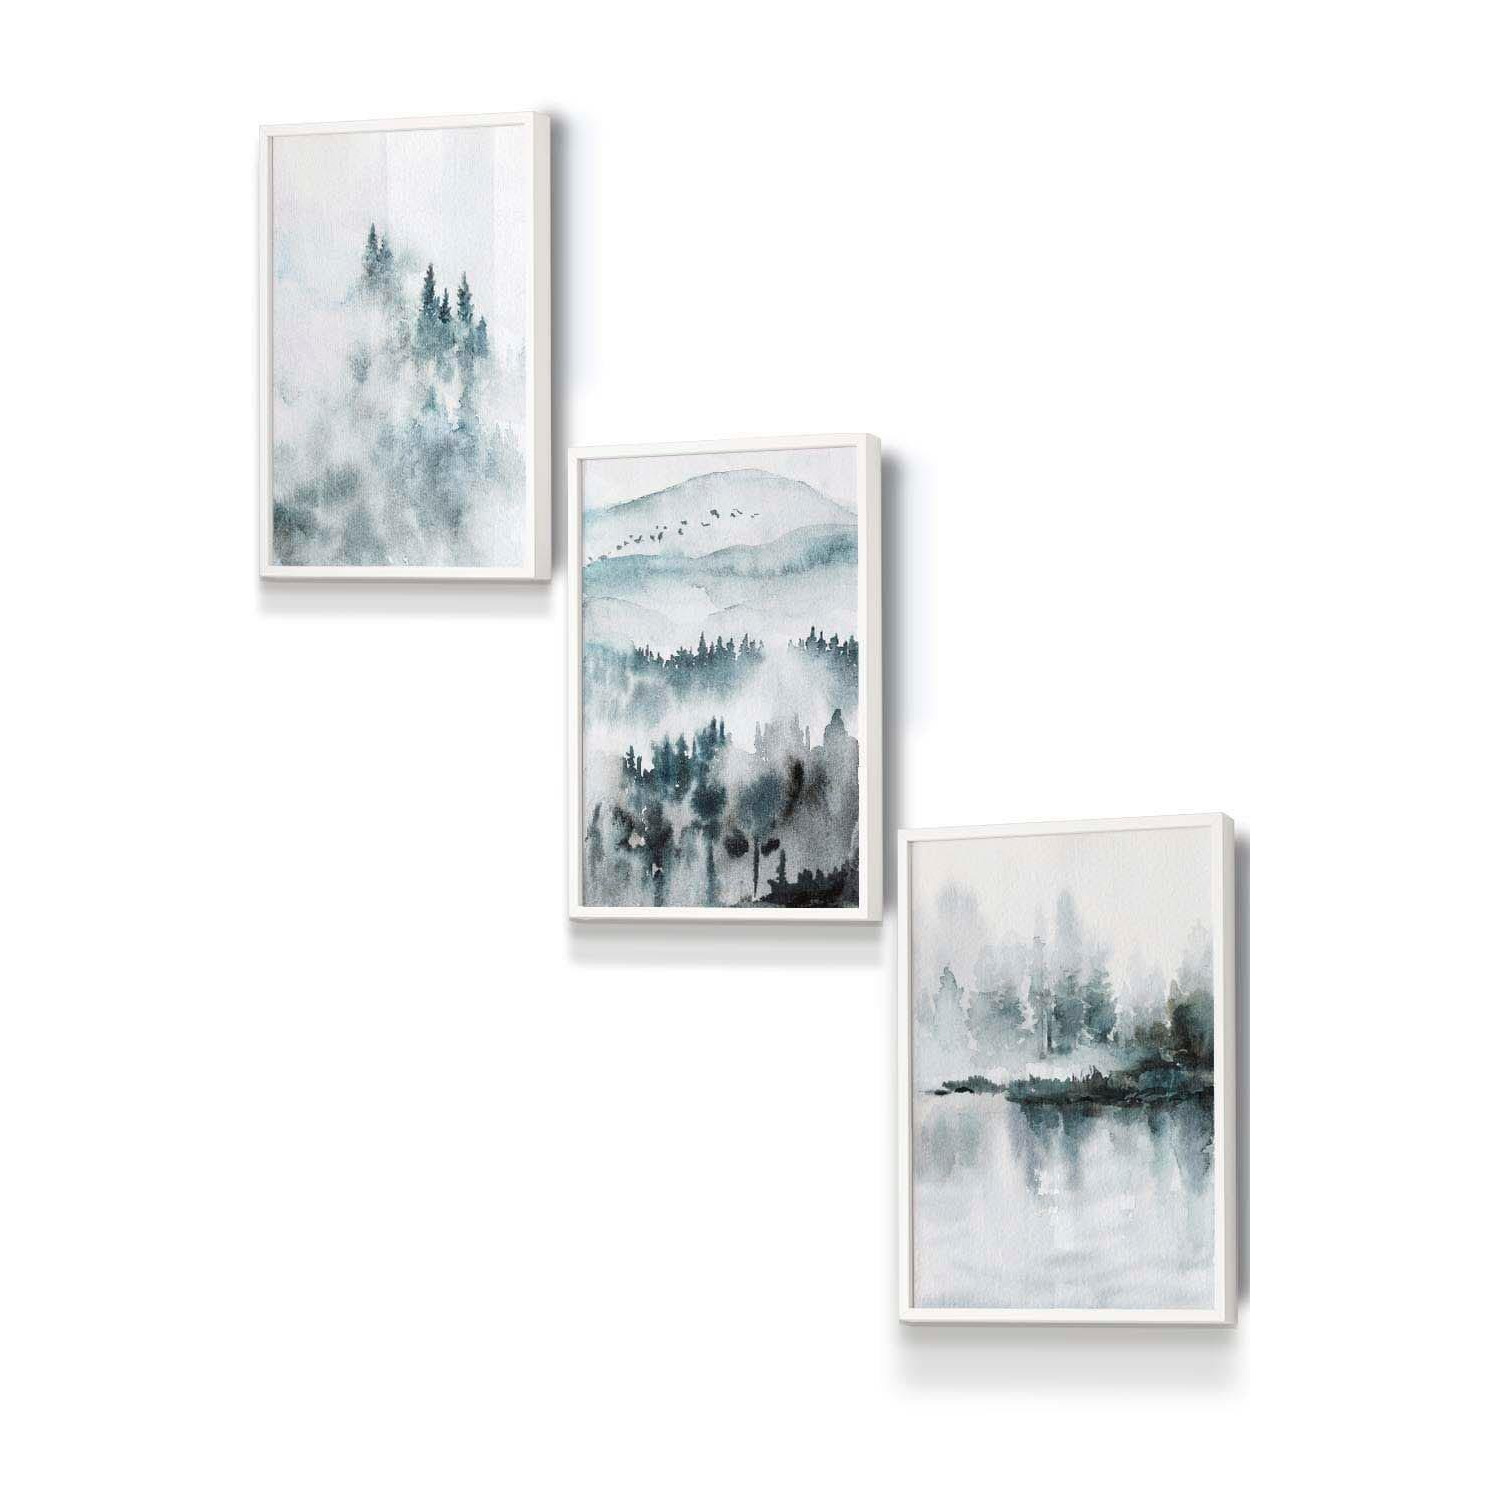 Set of 3 White Framed Teal Blue Abstract Forest Lake Wall Art - image 1